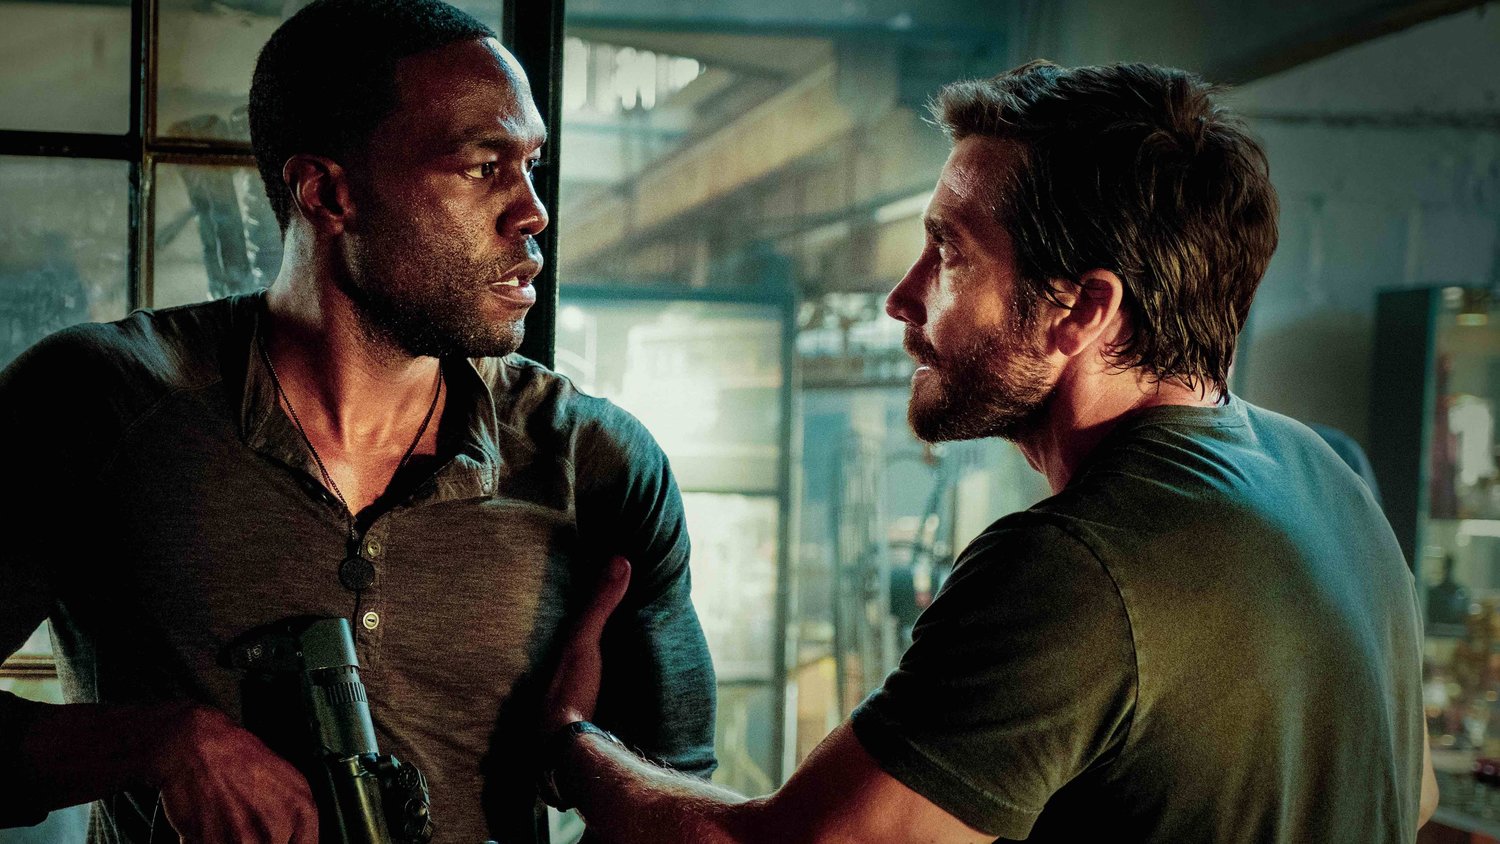 Michael Bay's "Ambulance" (2022) stars Yahya Abdul-Mateen II (left) and Jake Gyllenhaal as adopted brothers Will and Danny Sharp who together hijack an ambulance to escape police after a bungled bank heist.